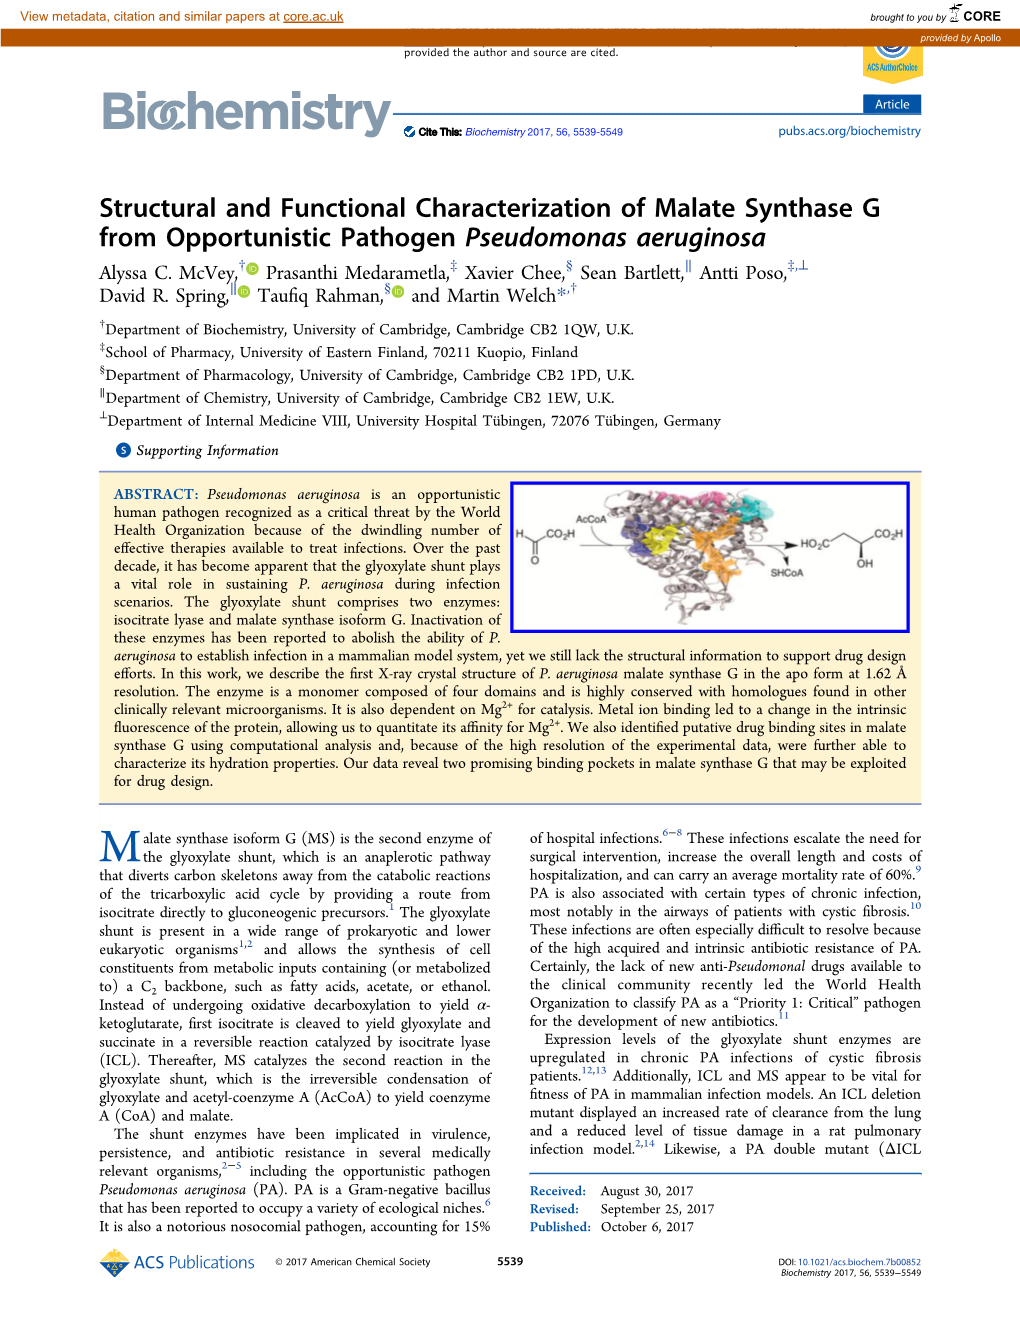 Structural and Functional Characterization of Malate Synthase G from Opportunistic Pathogen Pseudomonas Aeruginosa † ‡ § ∥ ‡ ⊥ Alyssa C